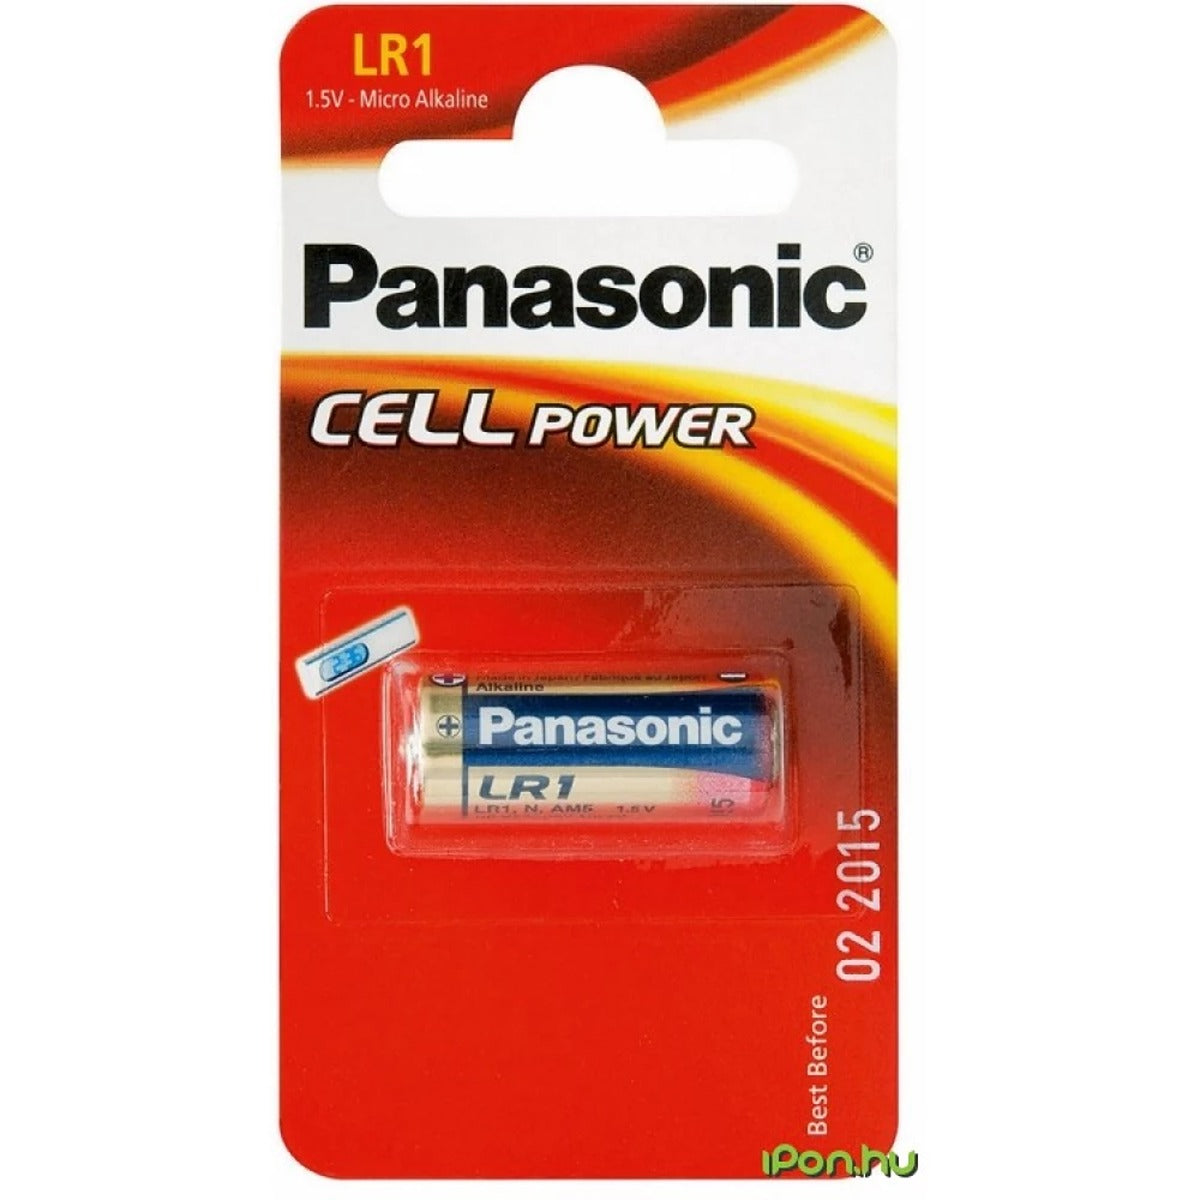 Panasonic - 1.5v SECURITY LR1 N-SIZE E90 BATTERIES - Continental Food Store